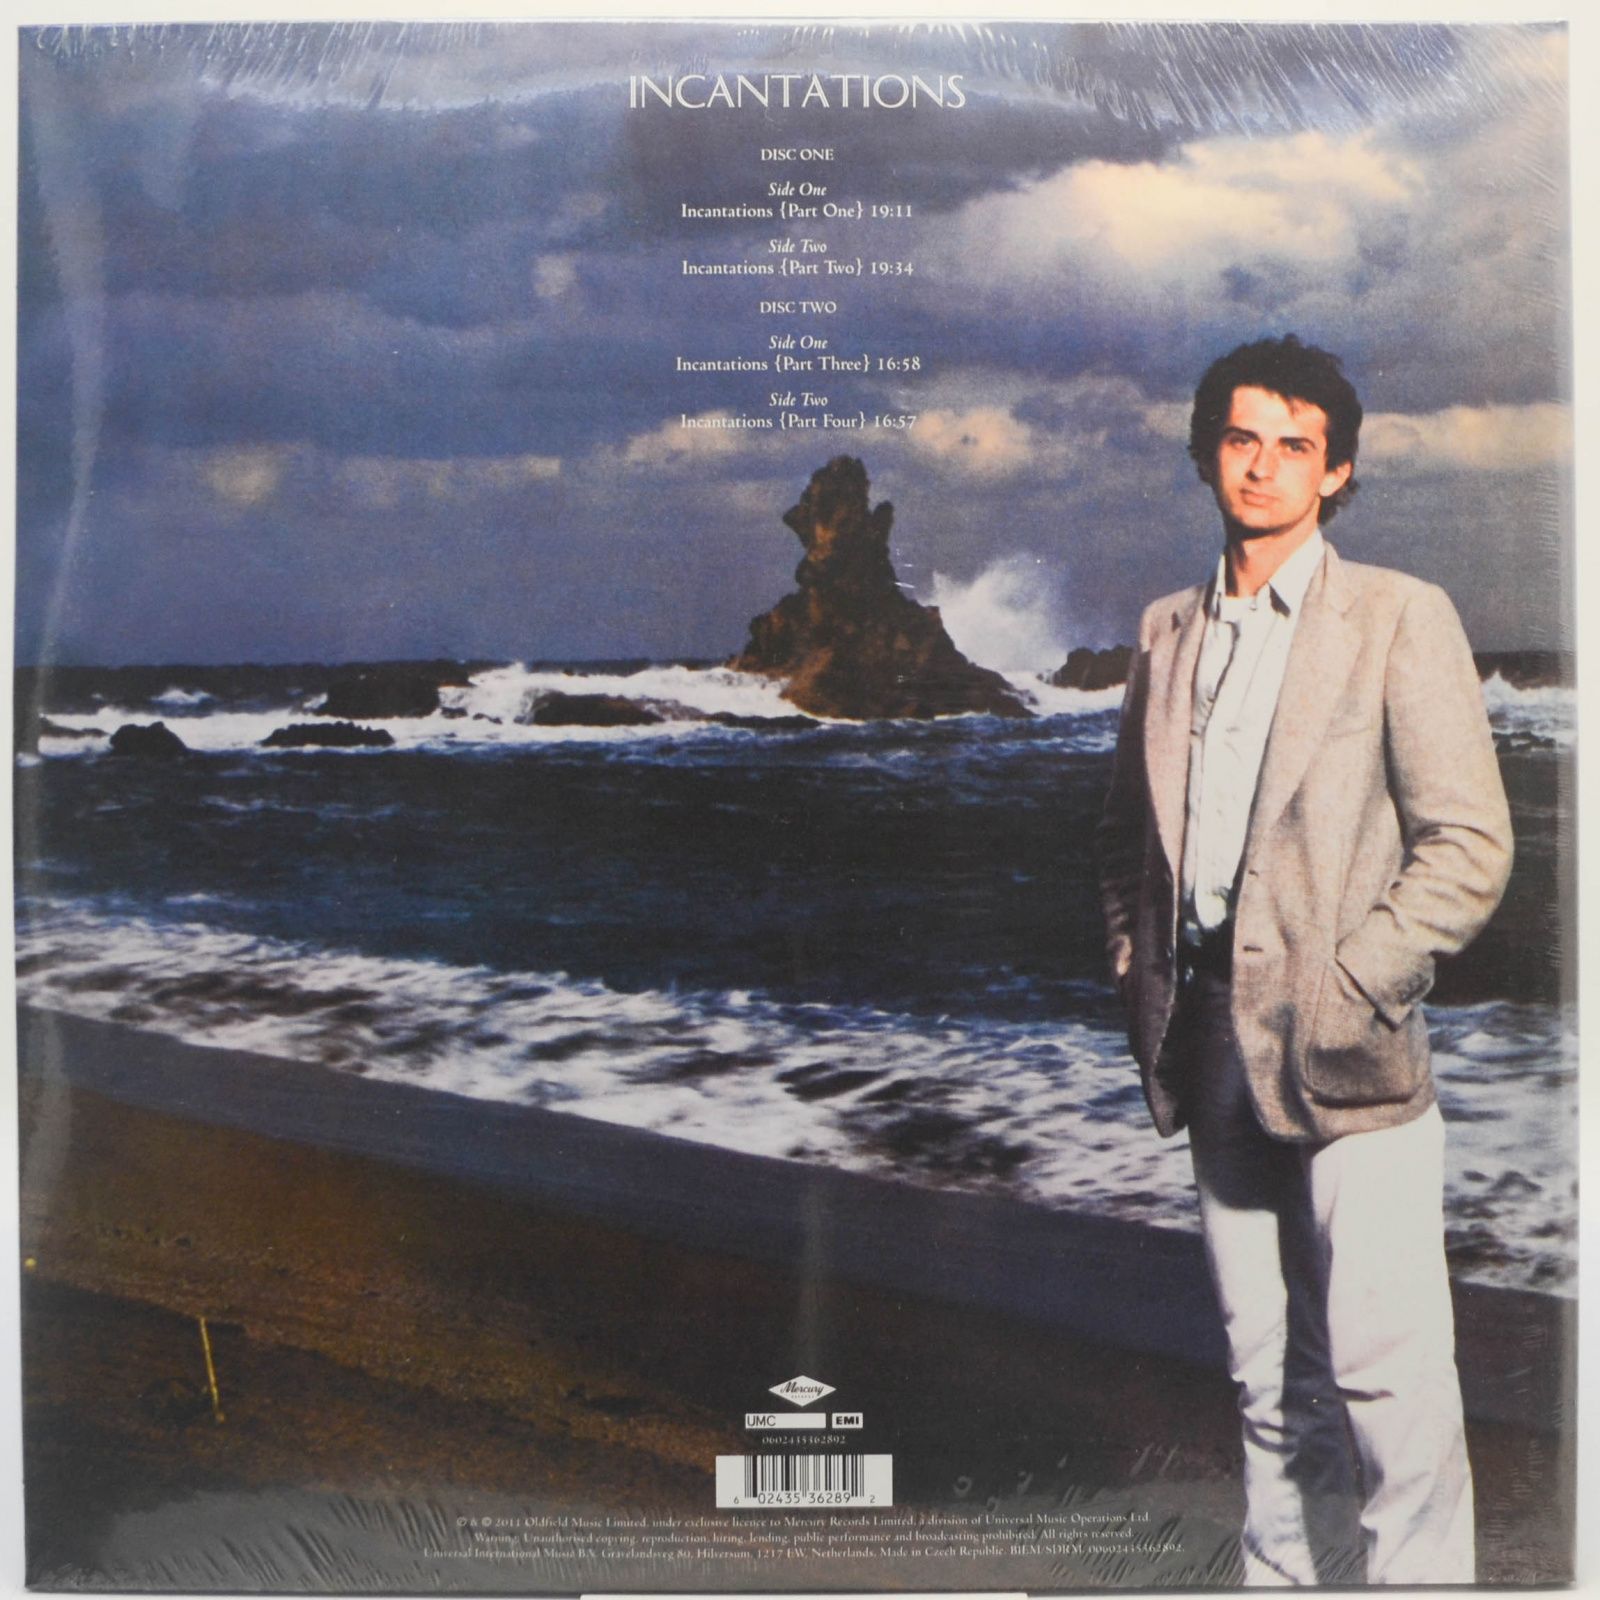 Mike Oldfield — Incantations (2LP), 1978